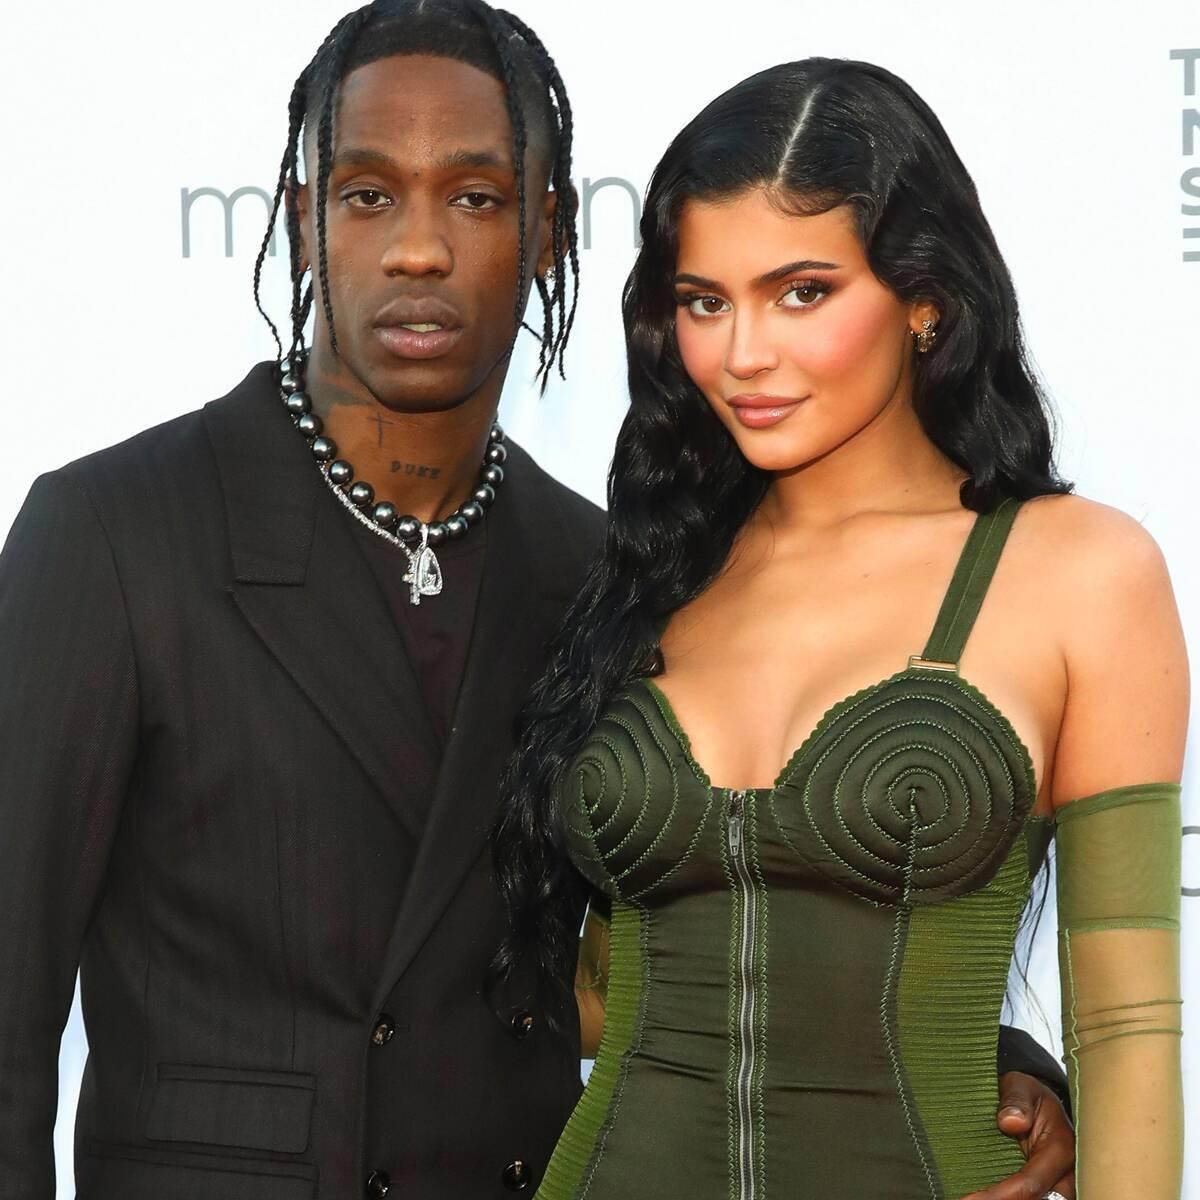 Kylie Jenner Is Showering Her Support On Travis Scott After His Sweet Shoutout To Daughter Stormi At VMAs!!